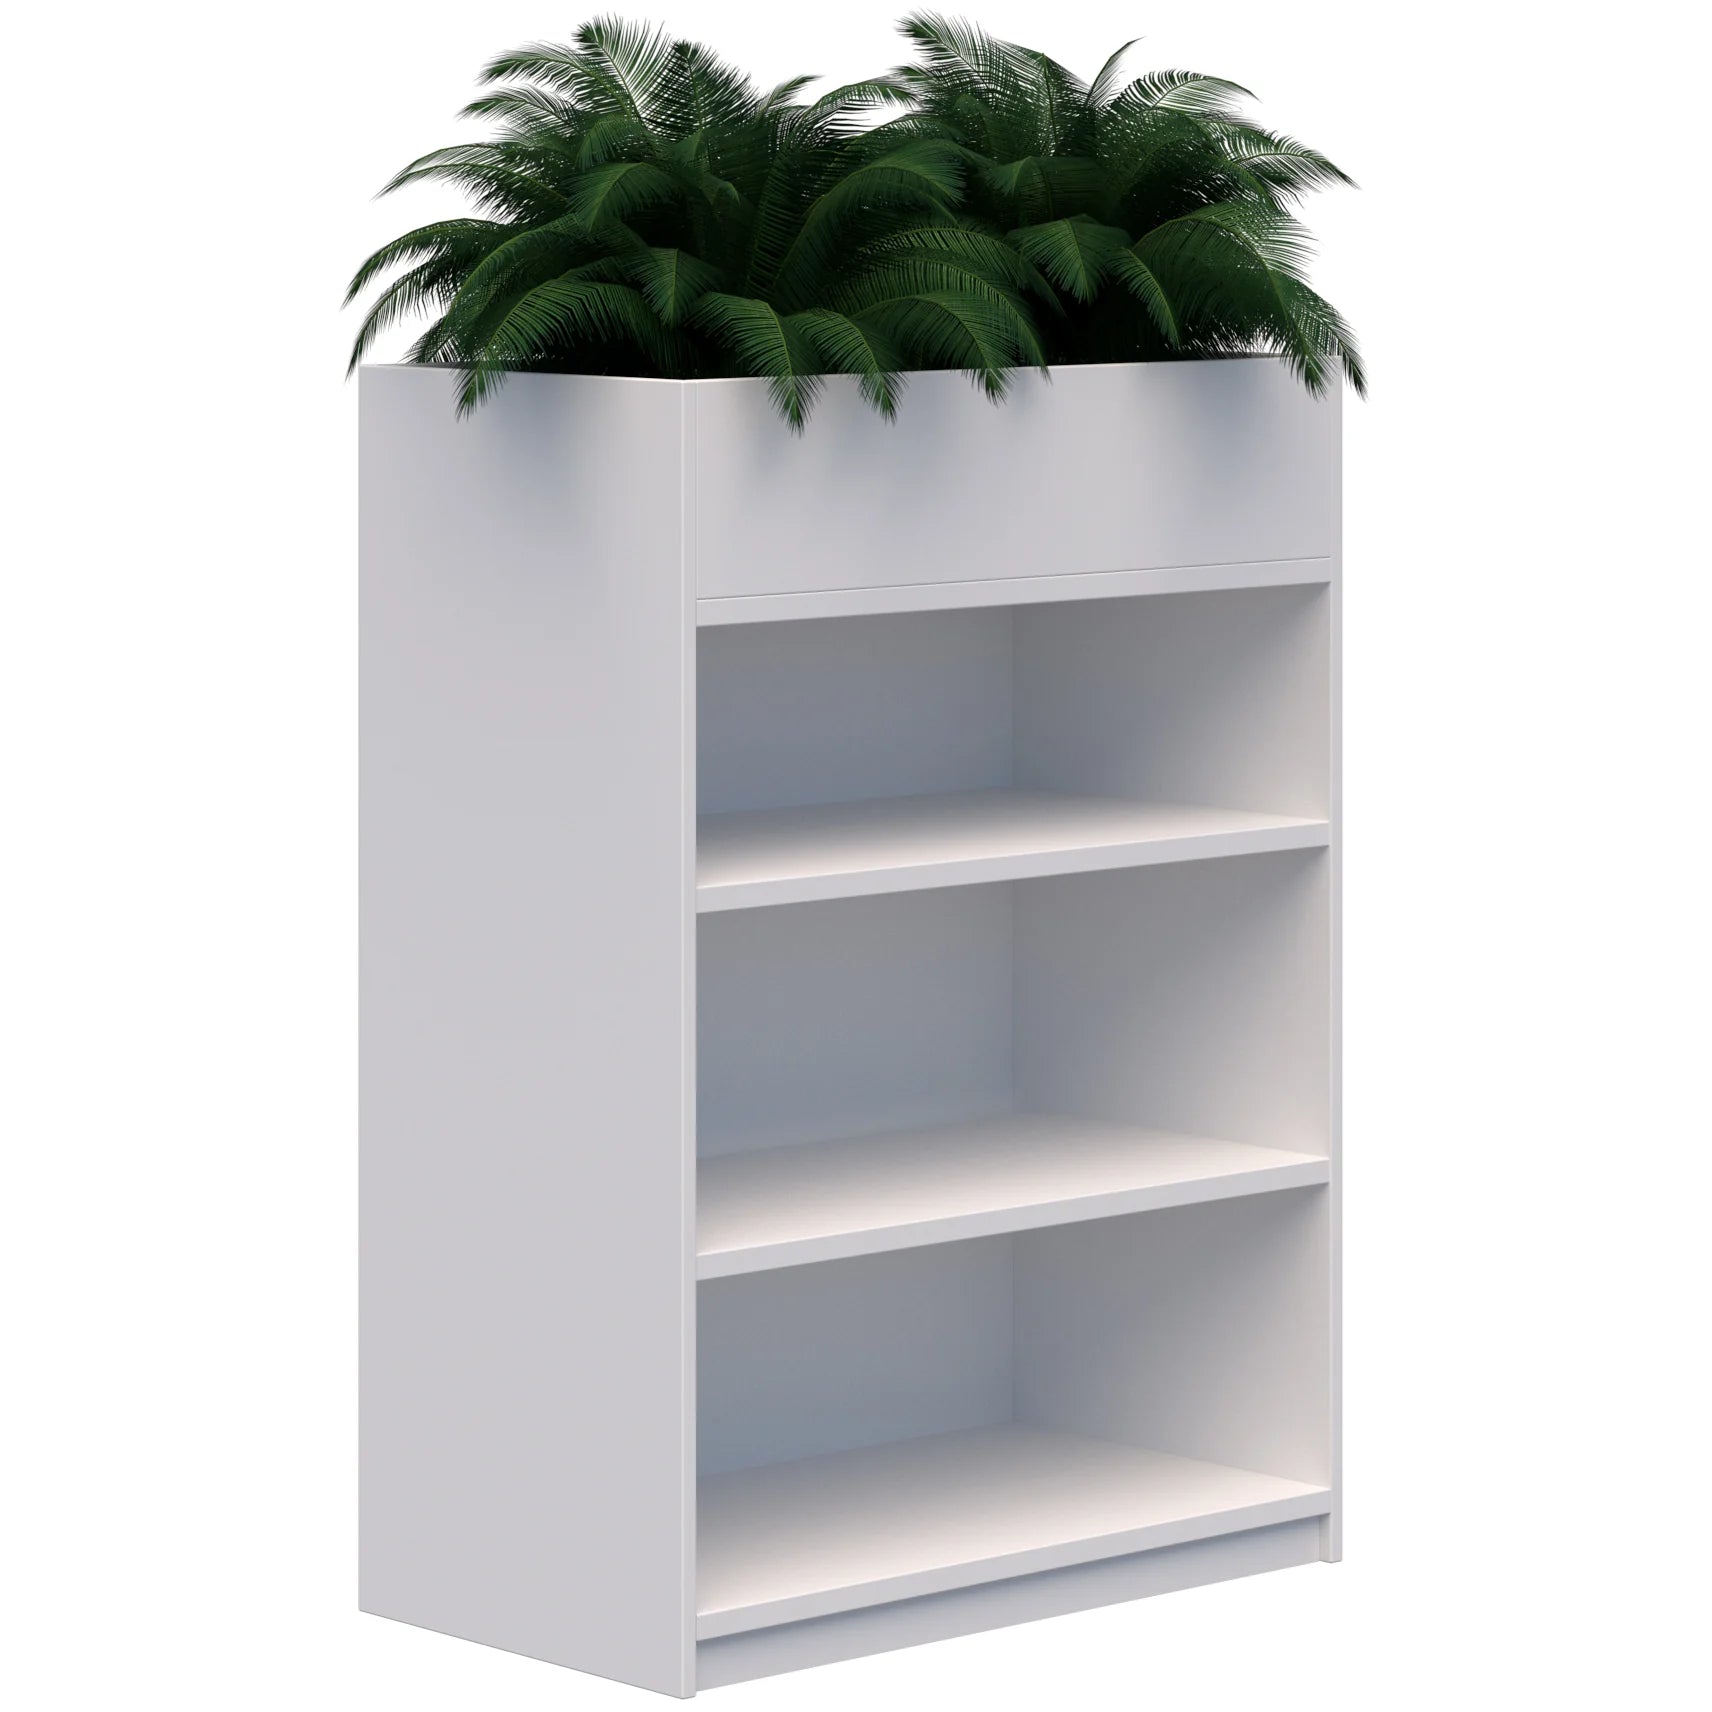 Three tier bookcase with built in planter box on top in snow velvet white colour.